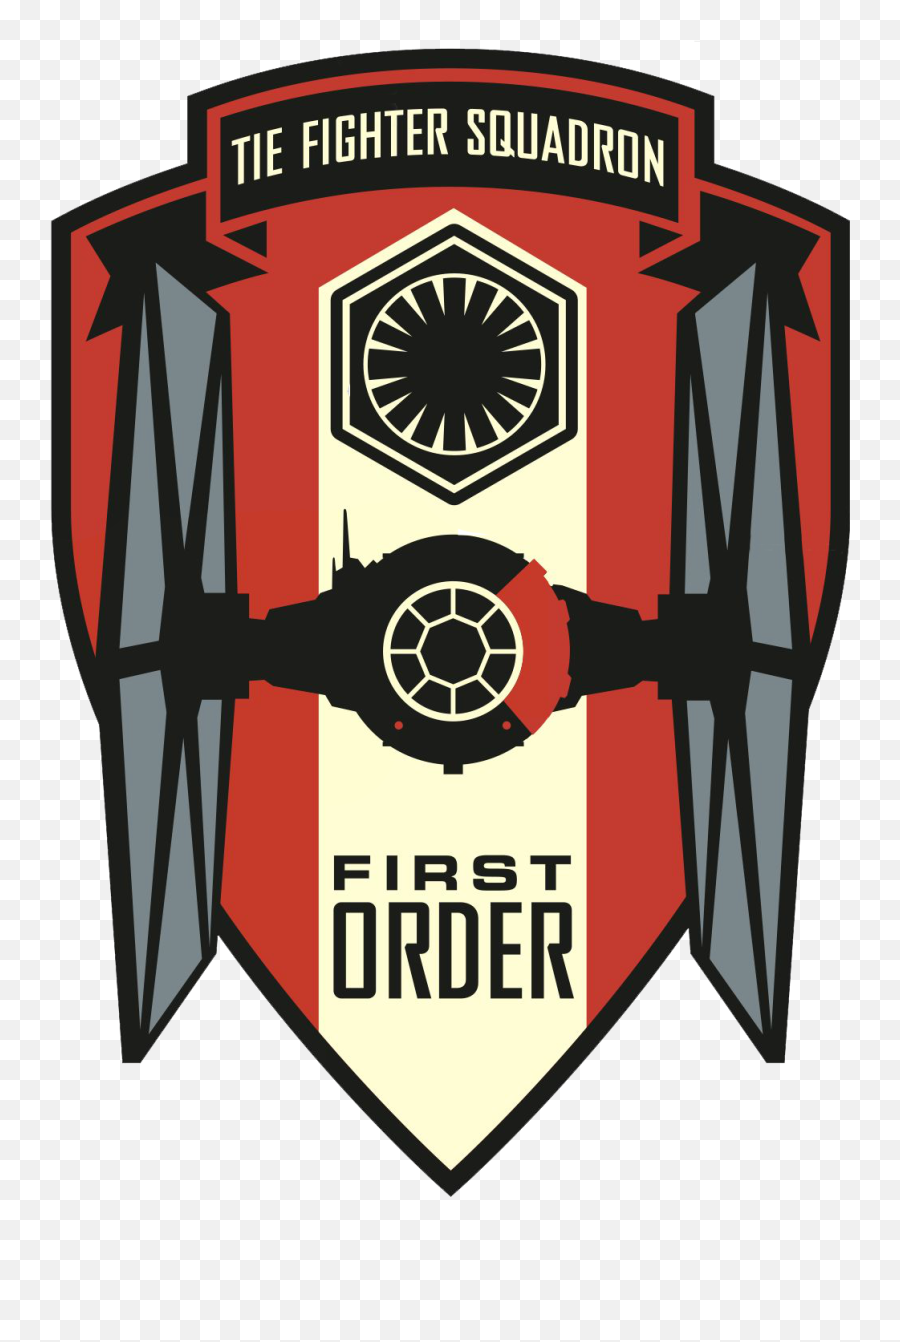 Tie Fighter - Star Wars Pilot Patch Hd Png Download Star Wars The Fighter Squadron Emoji,Star Wars Empire Logo